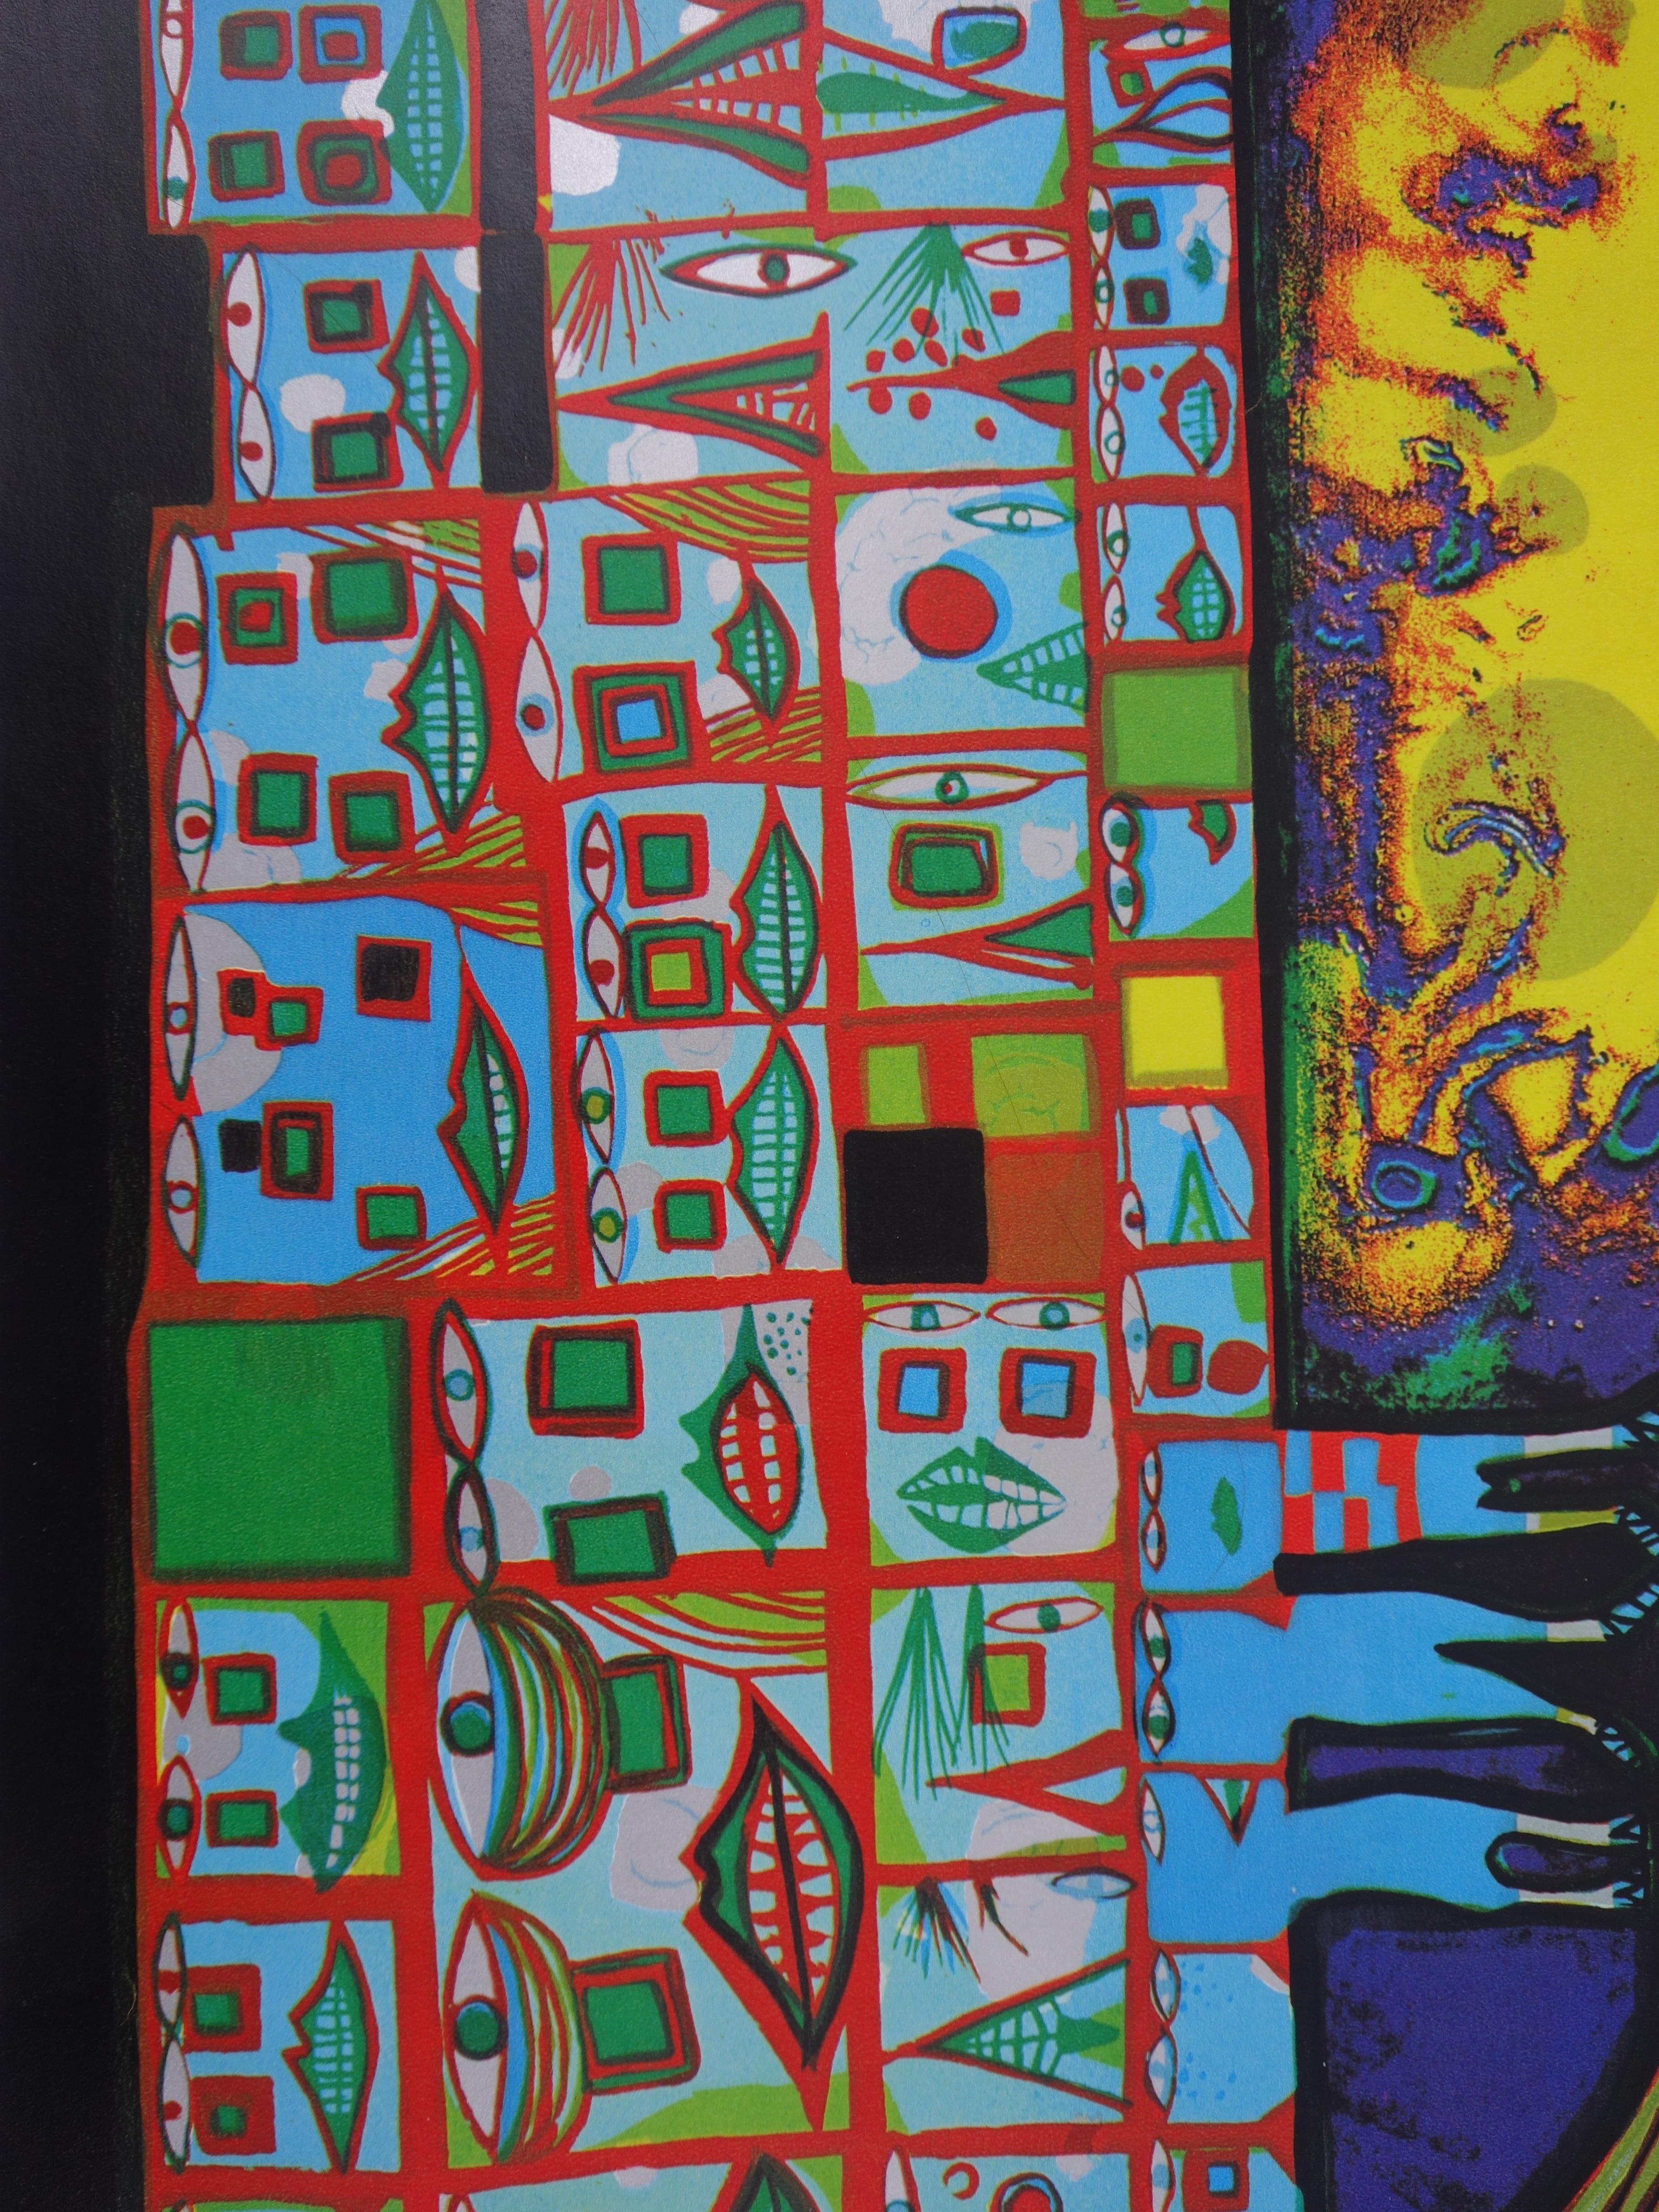 Friedensreich Hundertwasser
Olympiade

Lithograph and offset
Signature printed in the plate
On heavy paper 101 x 64 cm (c. 40 x 26 inch)
Made for the Olympic Games in Munich, 1972

Very good condition, light defects at the edge of the sheet (see